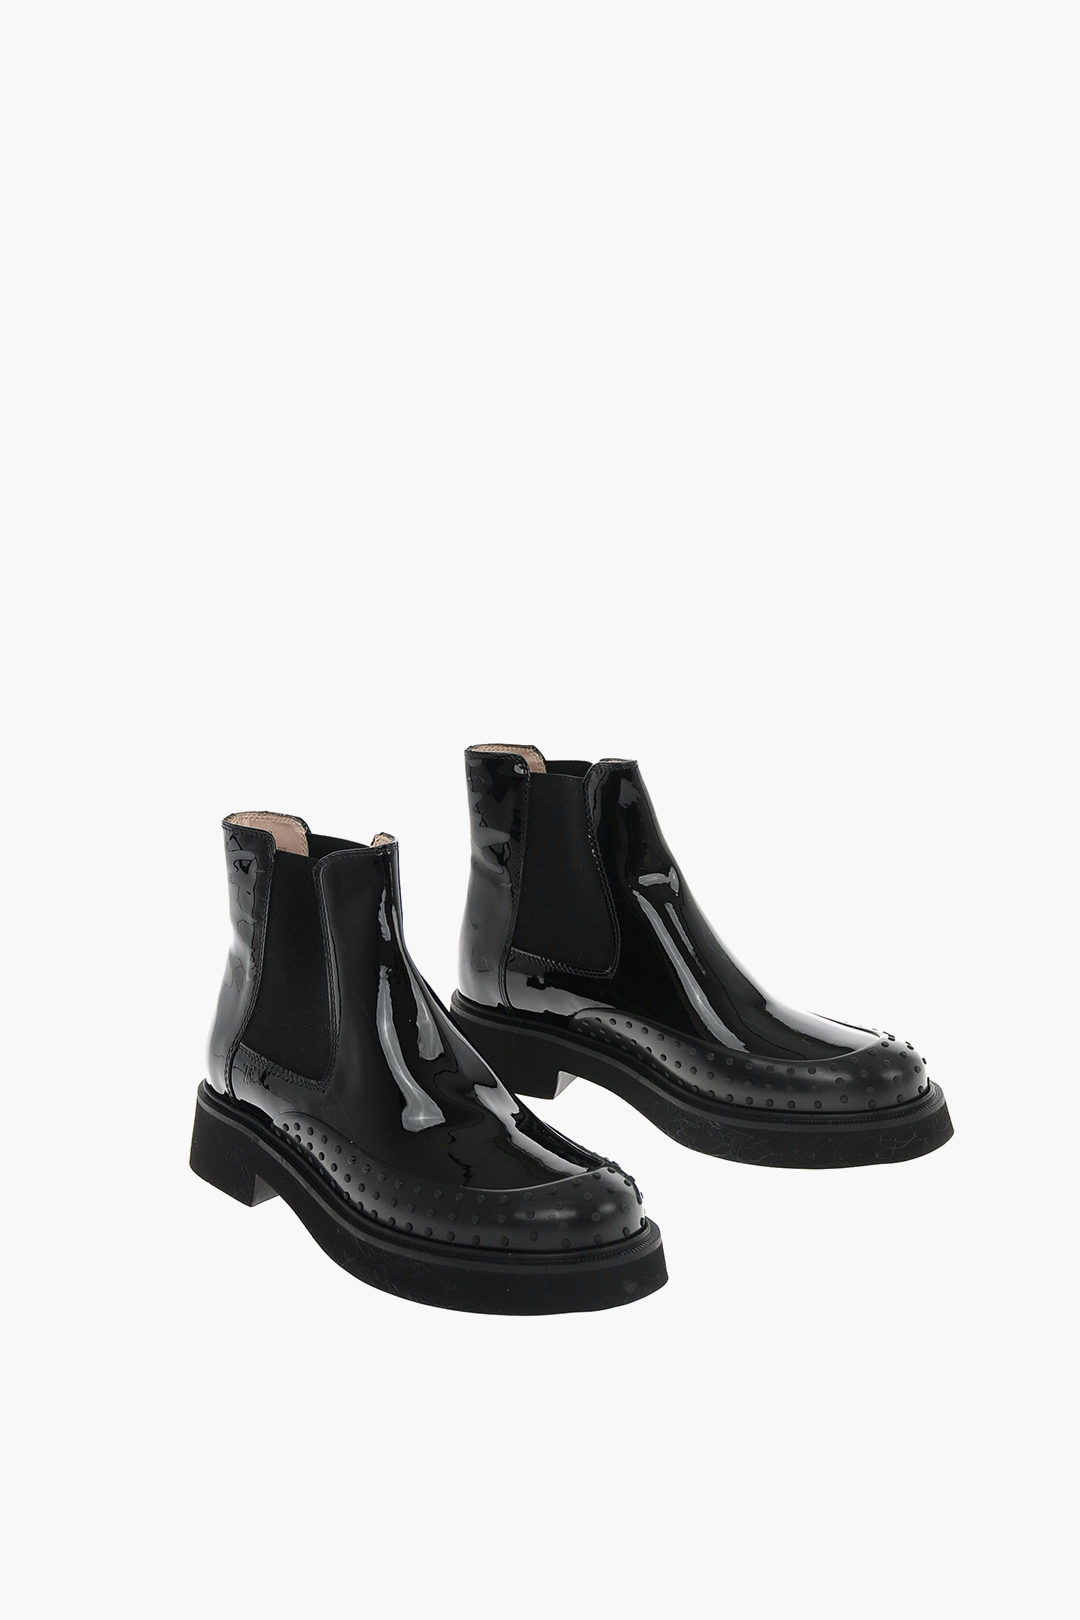 morfine Geld rubber telegram Tods Patent leather Chelsea boots women - Glamood Outlet